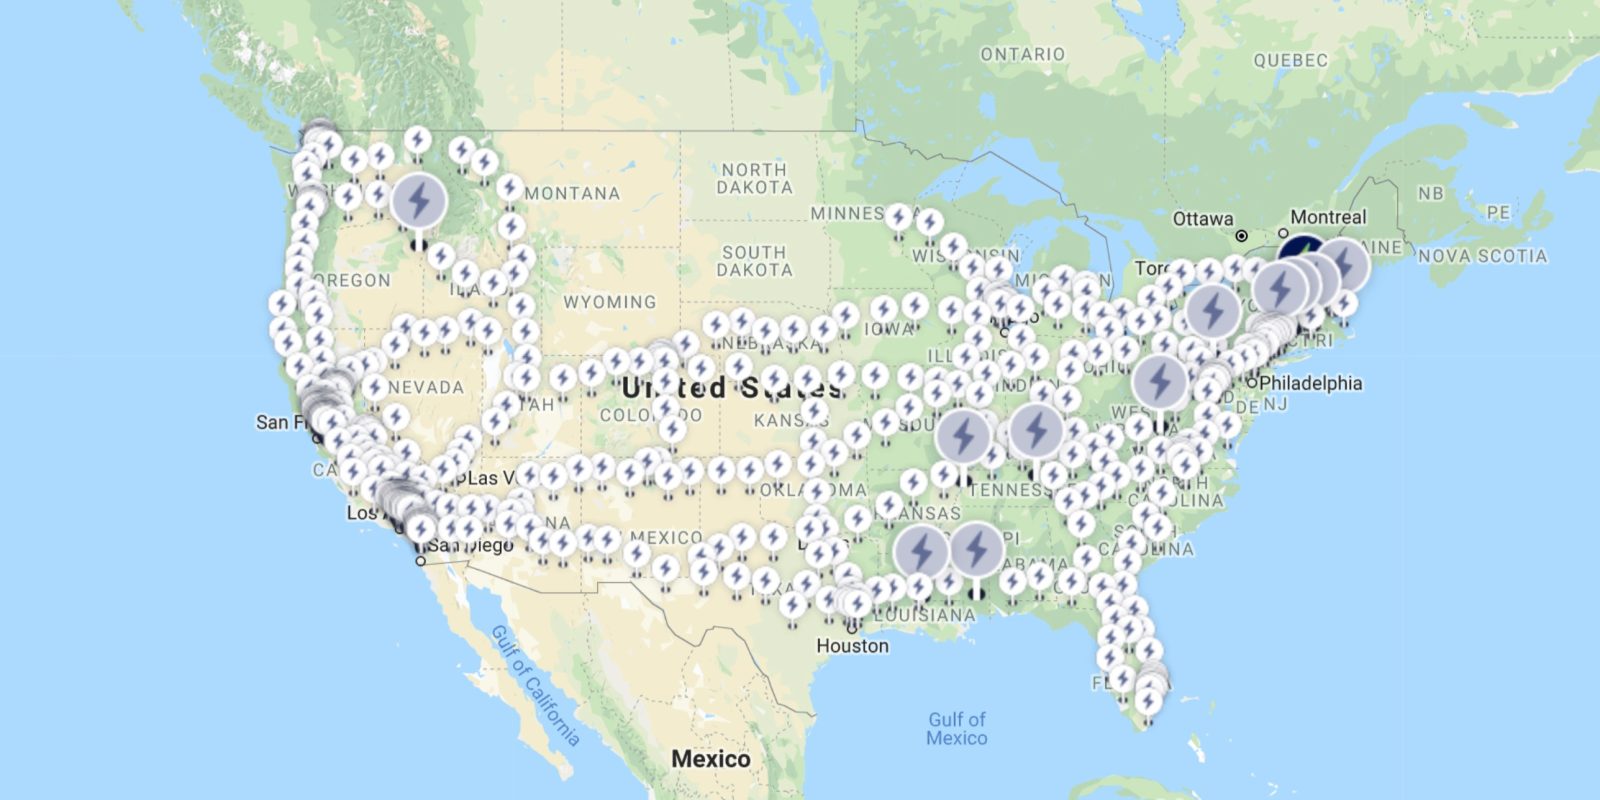 Electrify America unveils map of planned charging stations for its